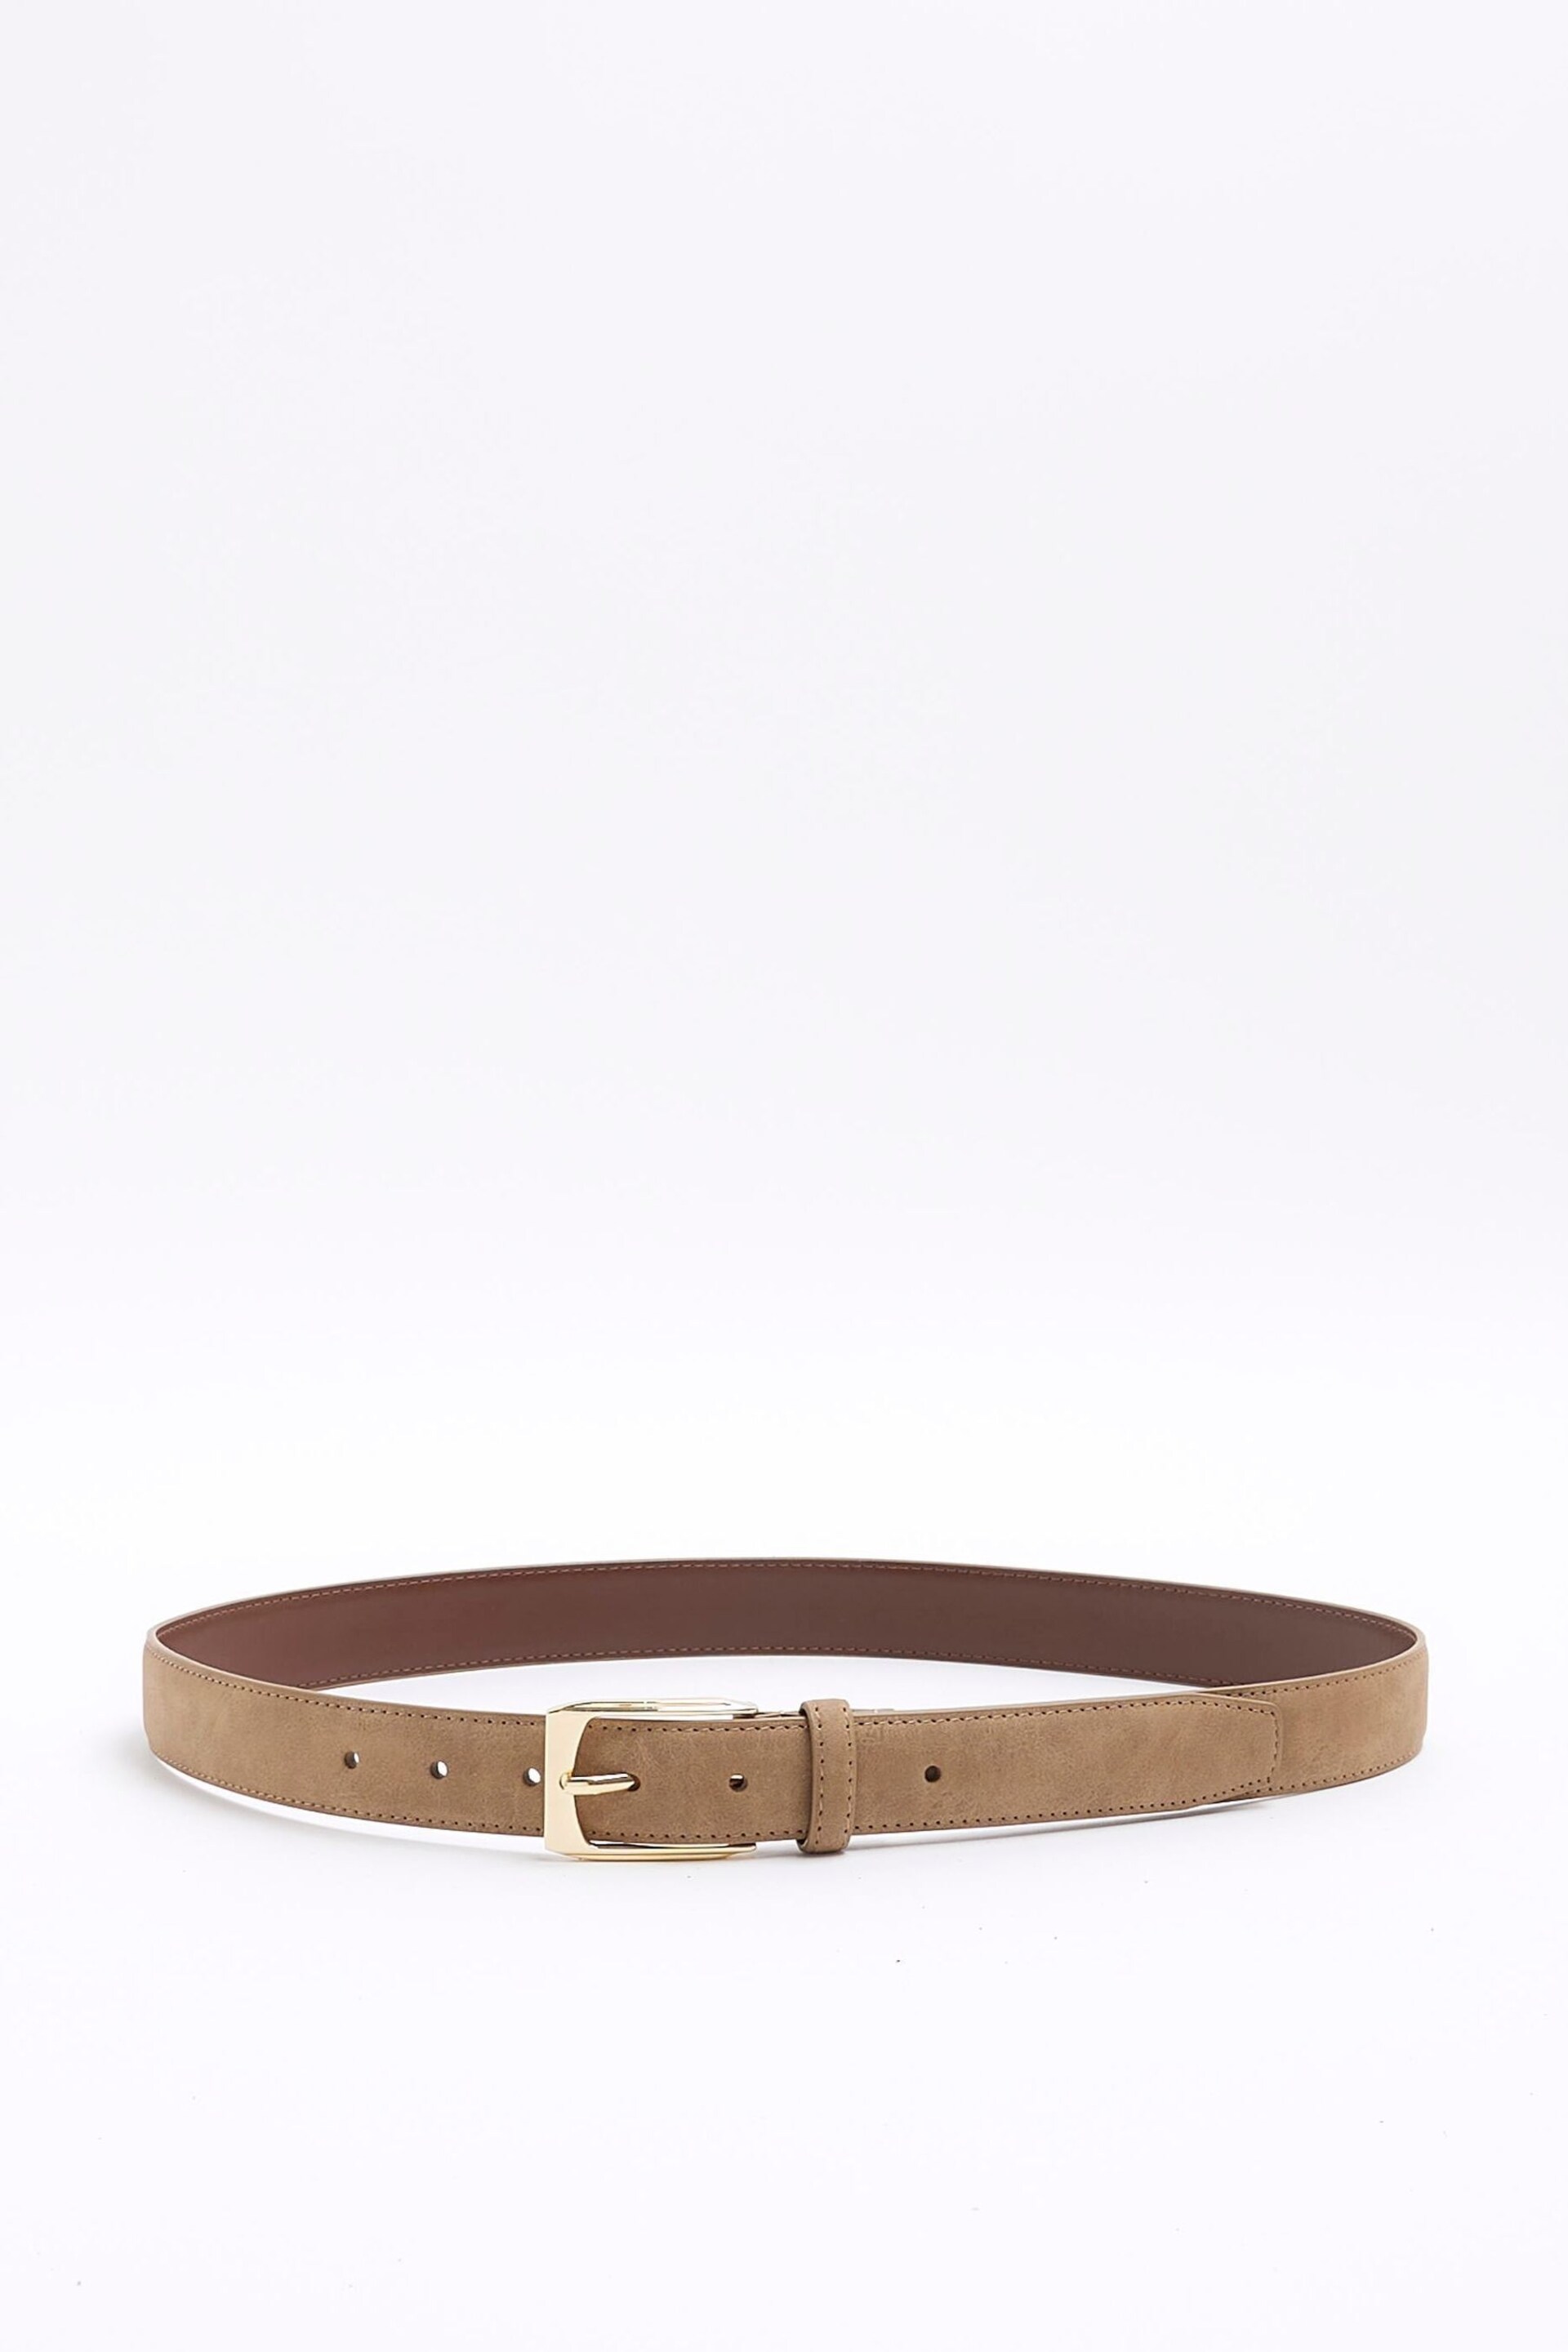 River Island Natural Stone Faux Leather Suedtte Belt - Image 1 of 2